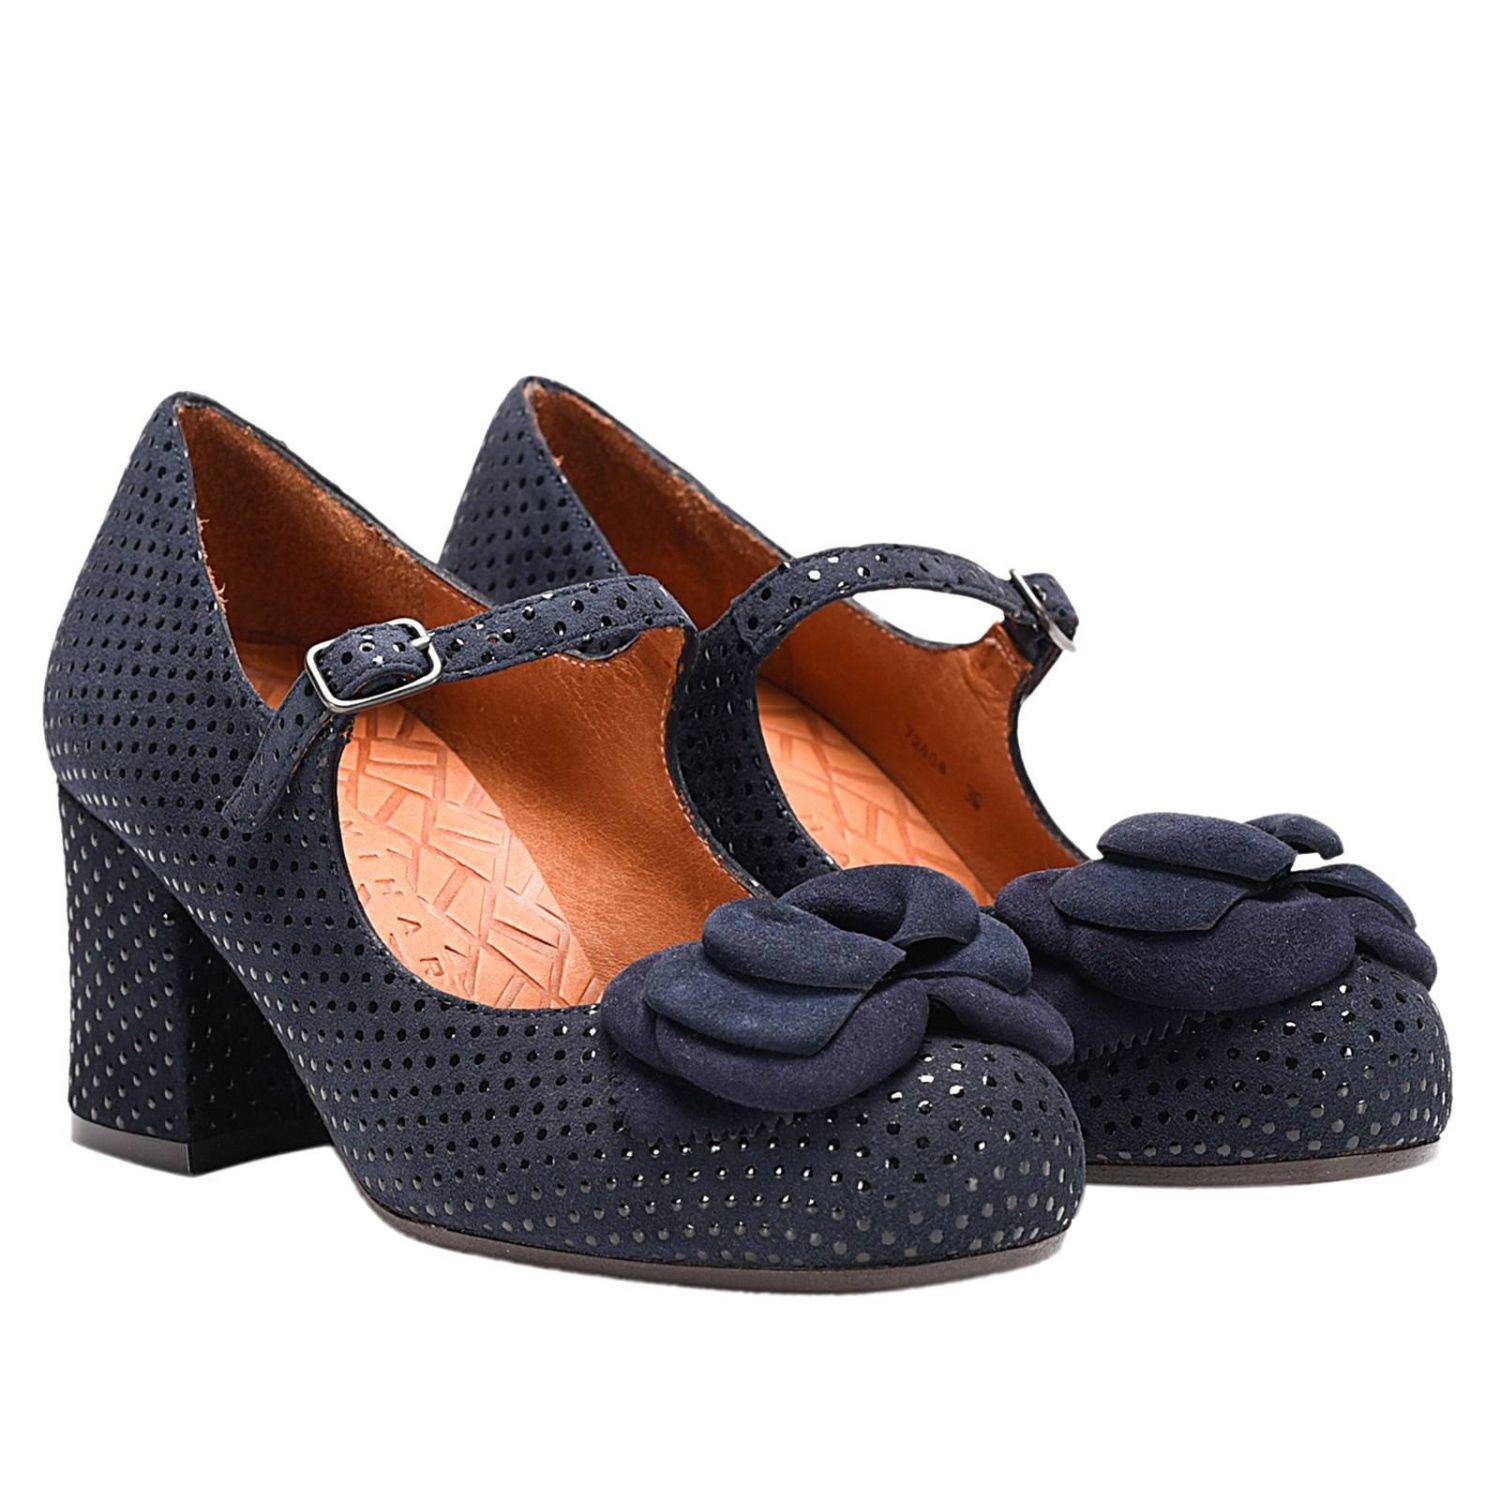 Lyst - Chie Mihara Pumps Shoes Woman in Blue